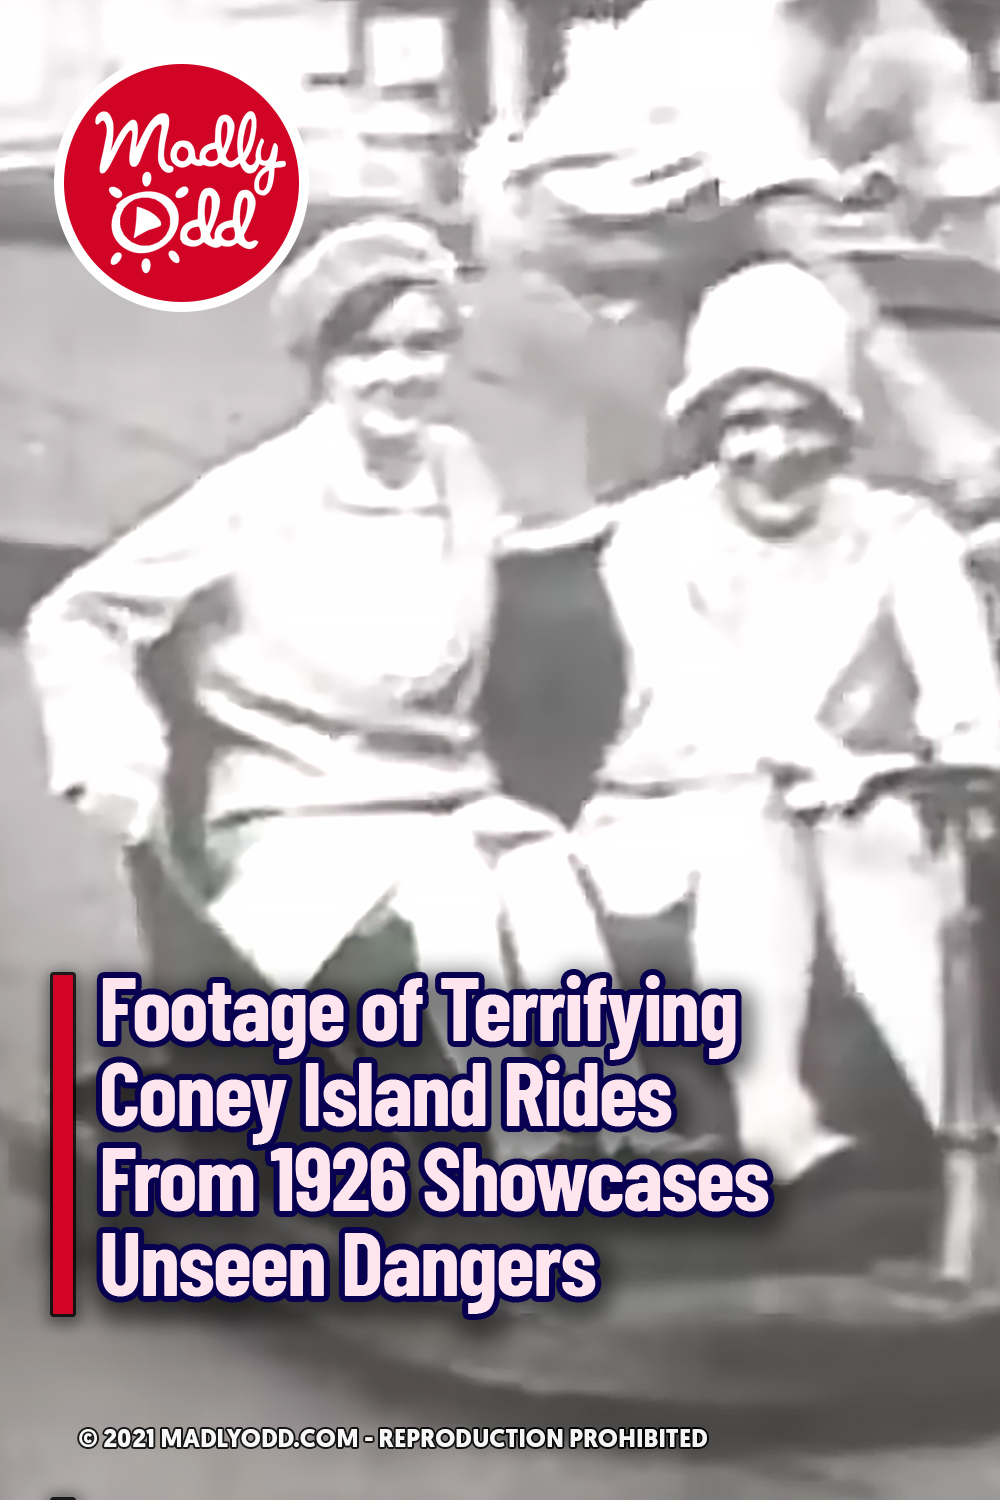 Footage of Terrifying Coney Island Rides From 1926 Showcases Unseen Dangers